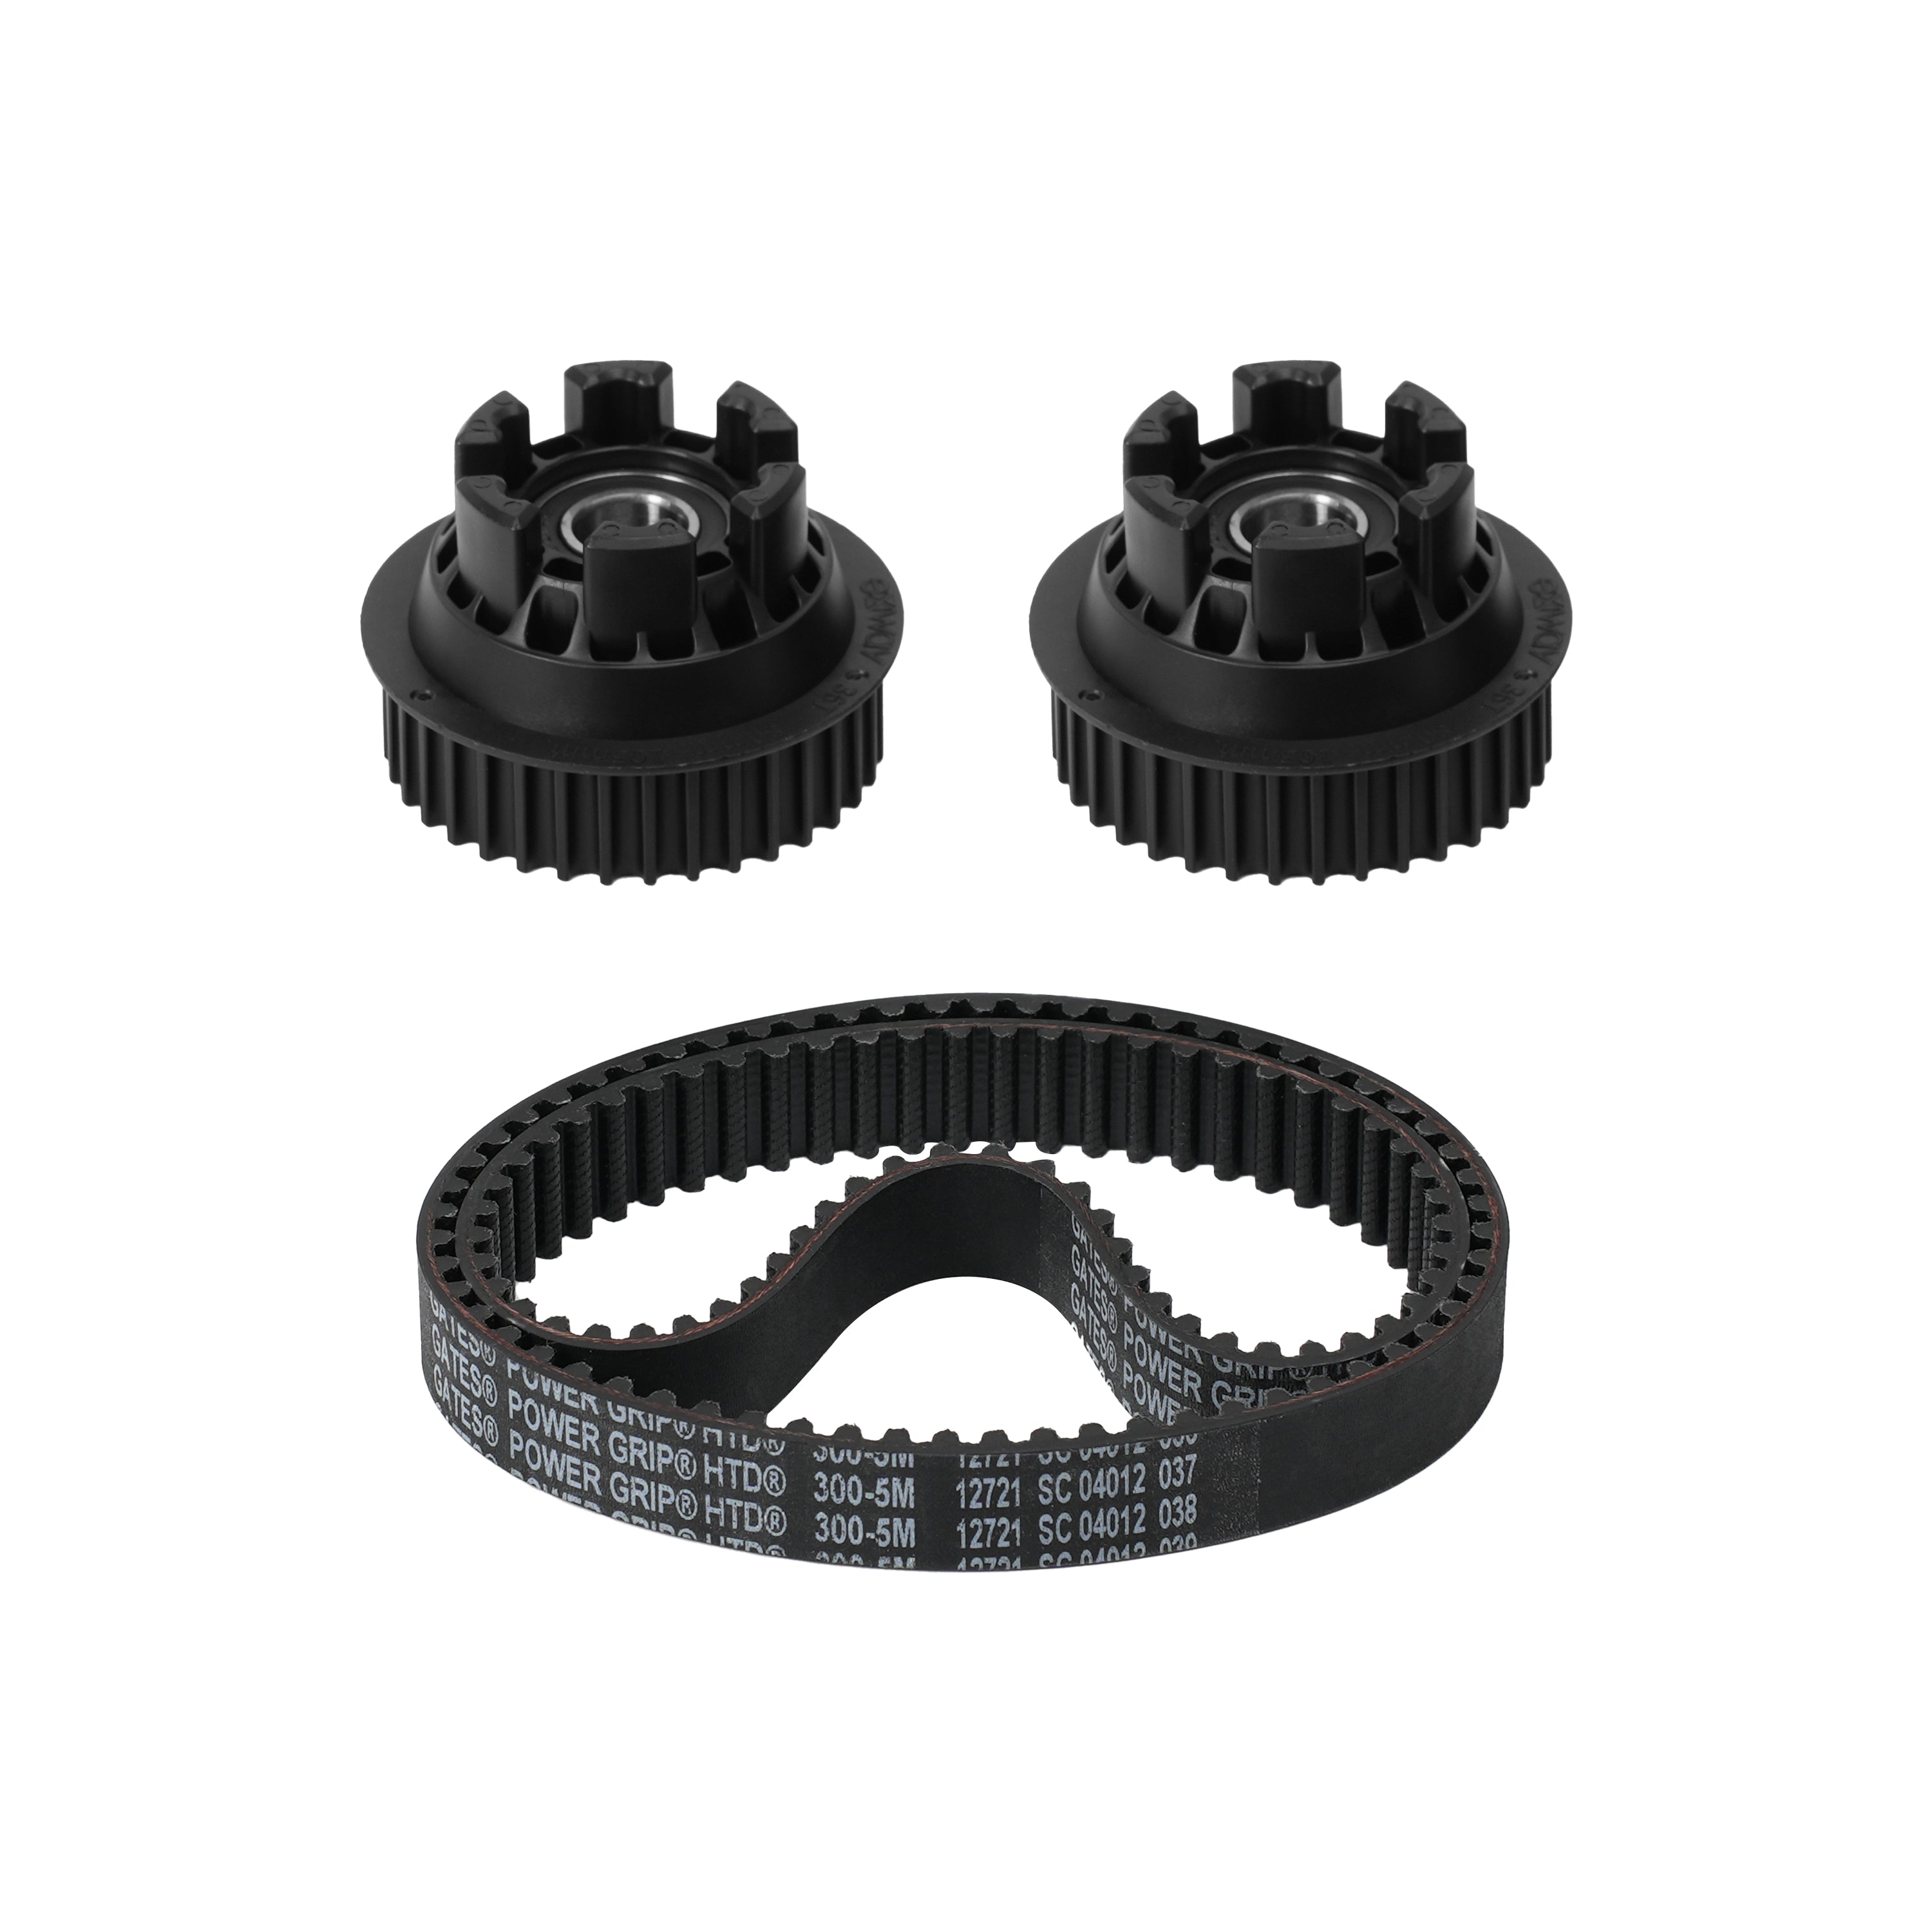 Pulleys and Belts Combo for Hydro All-Season Tires